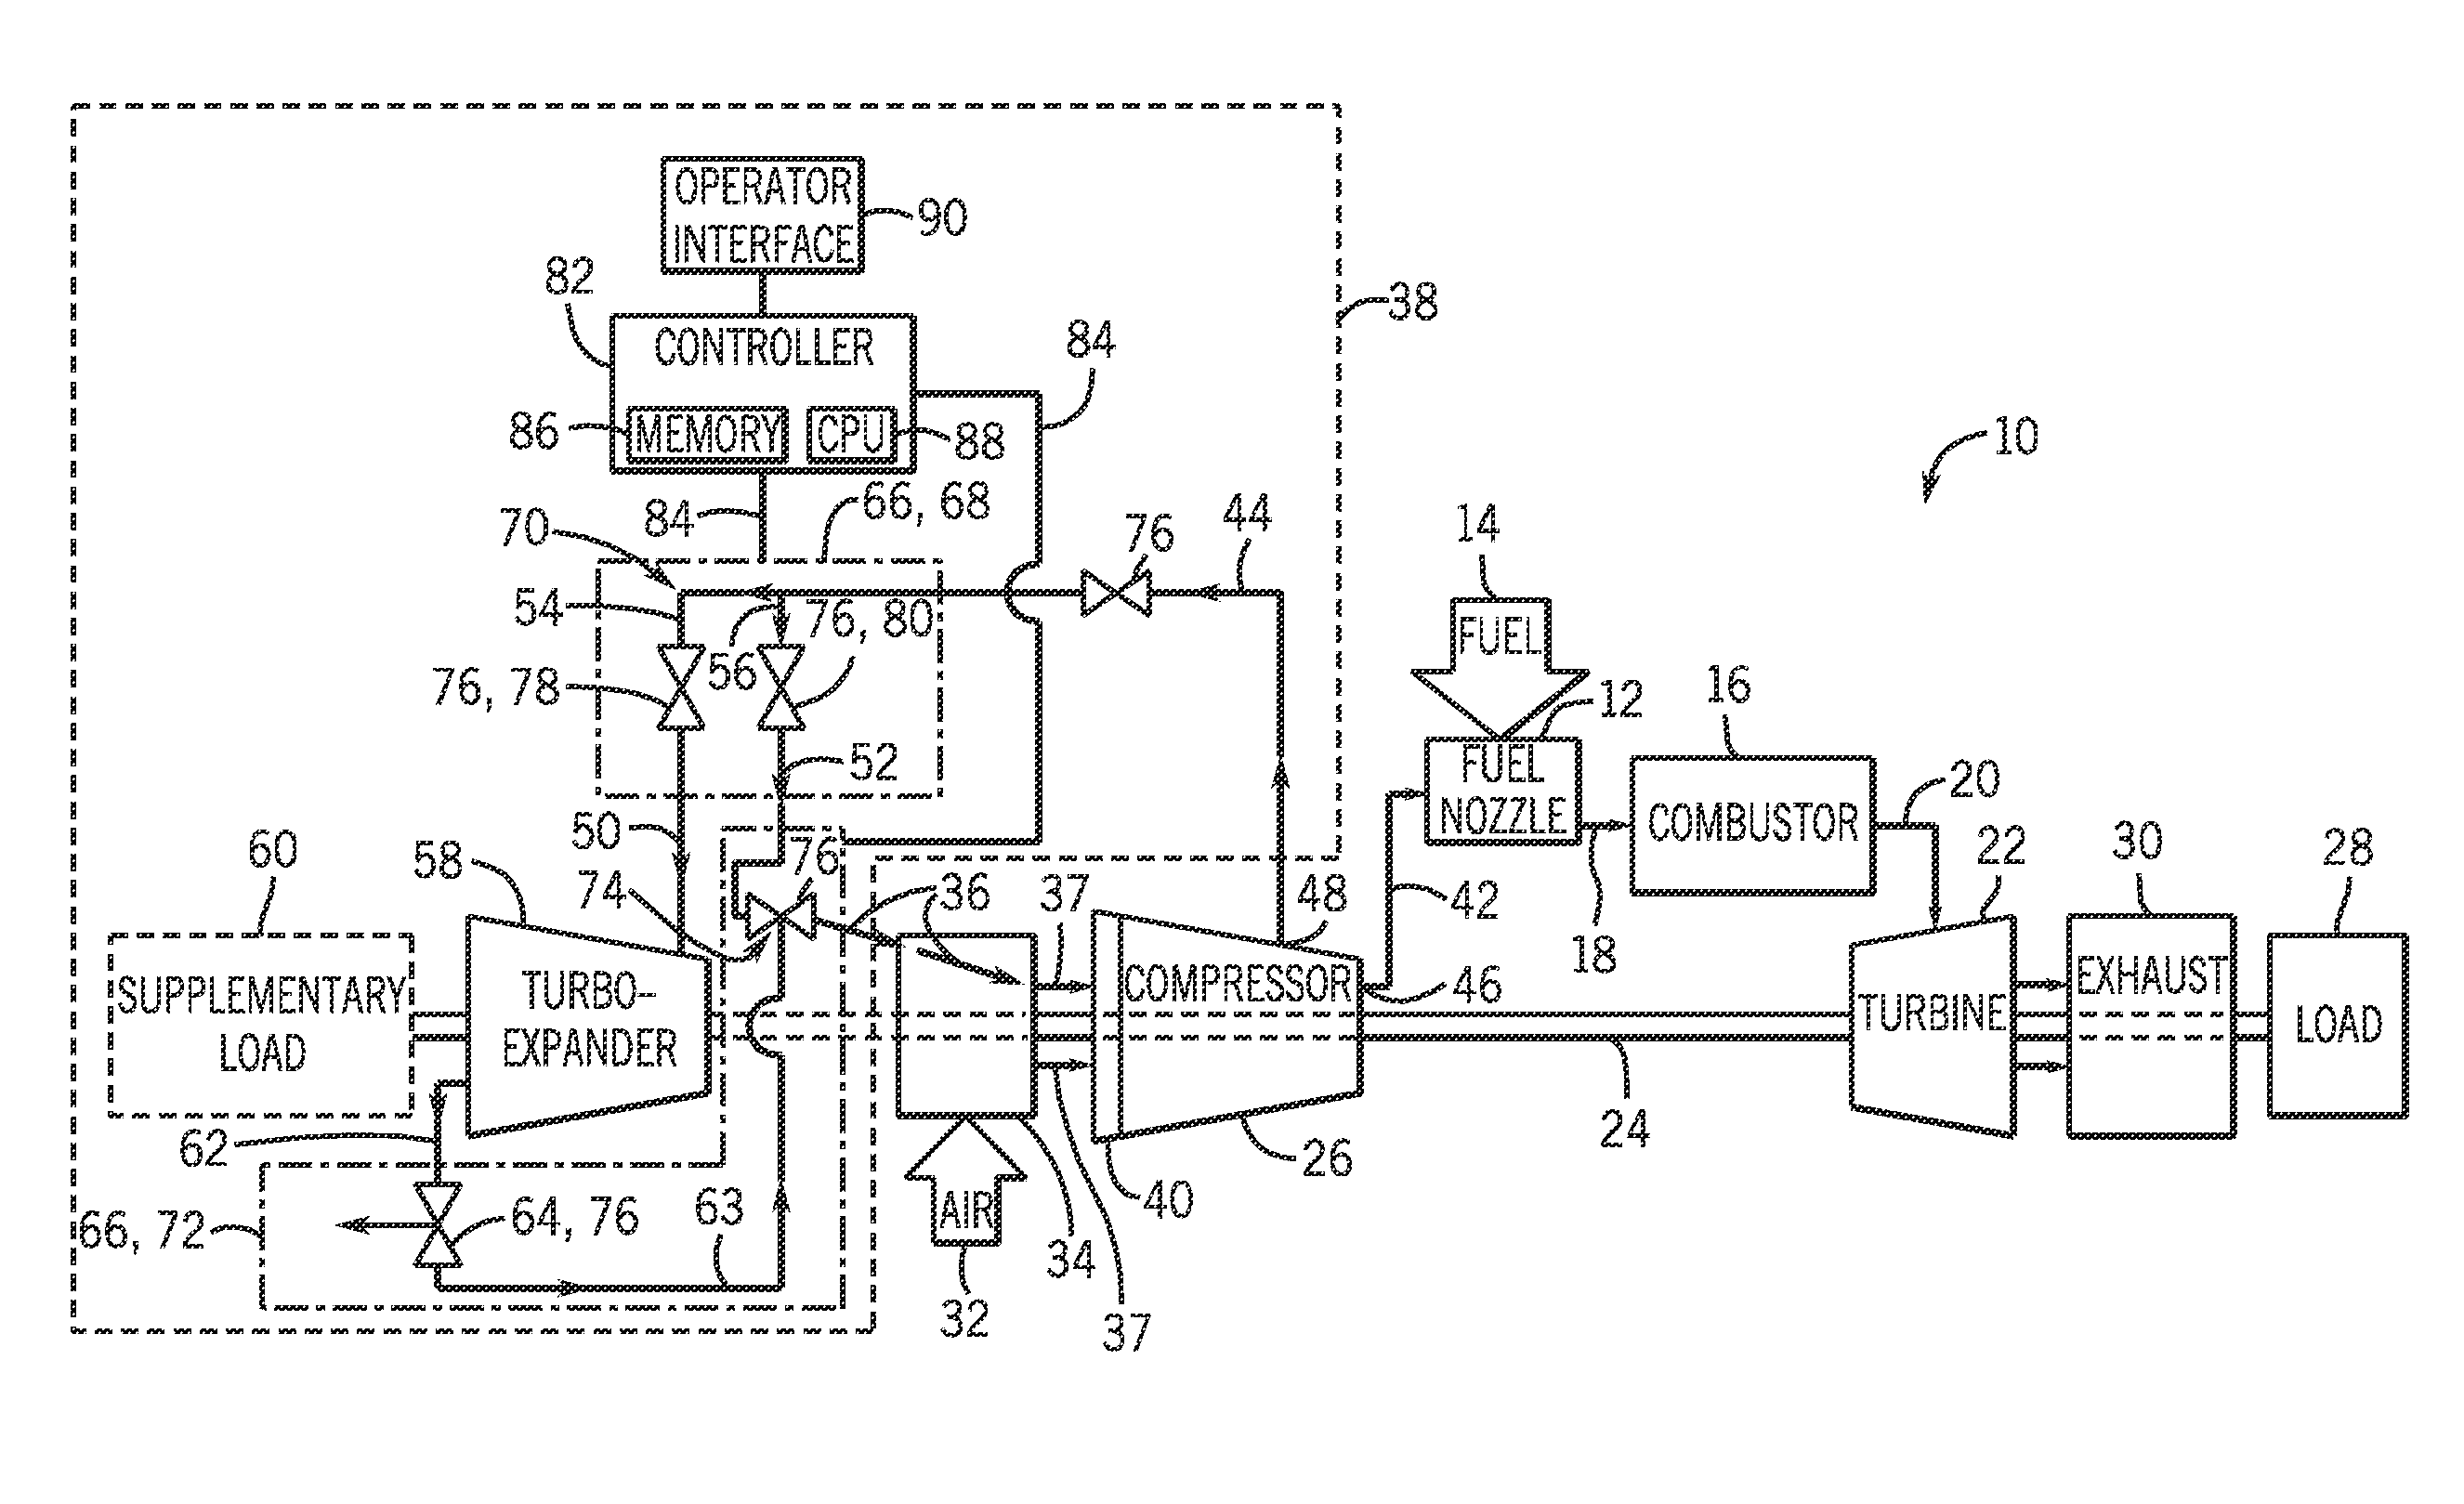 System and method for recirculating and recovering energy from compressor discharge bleed air